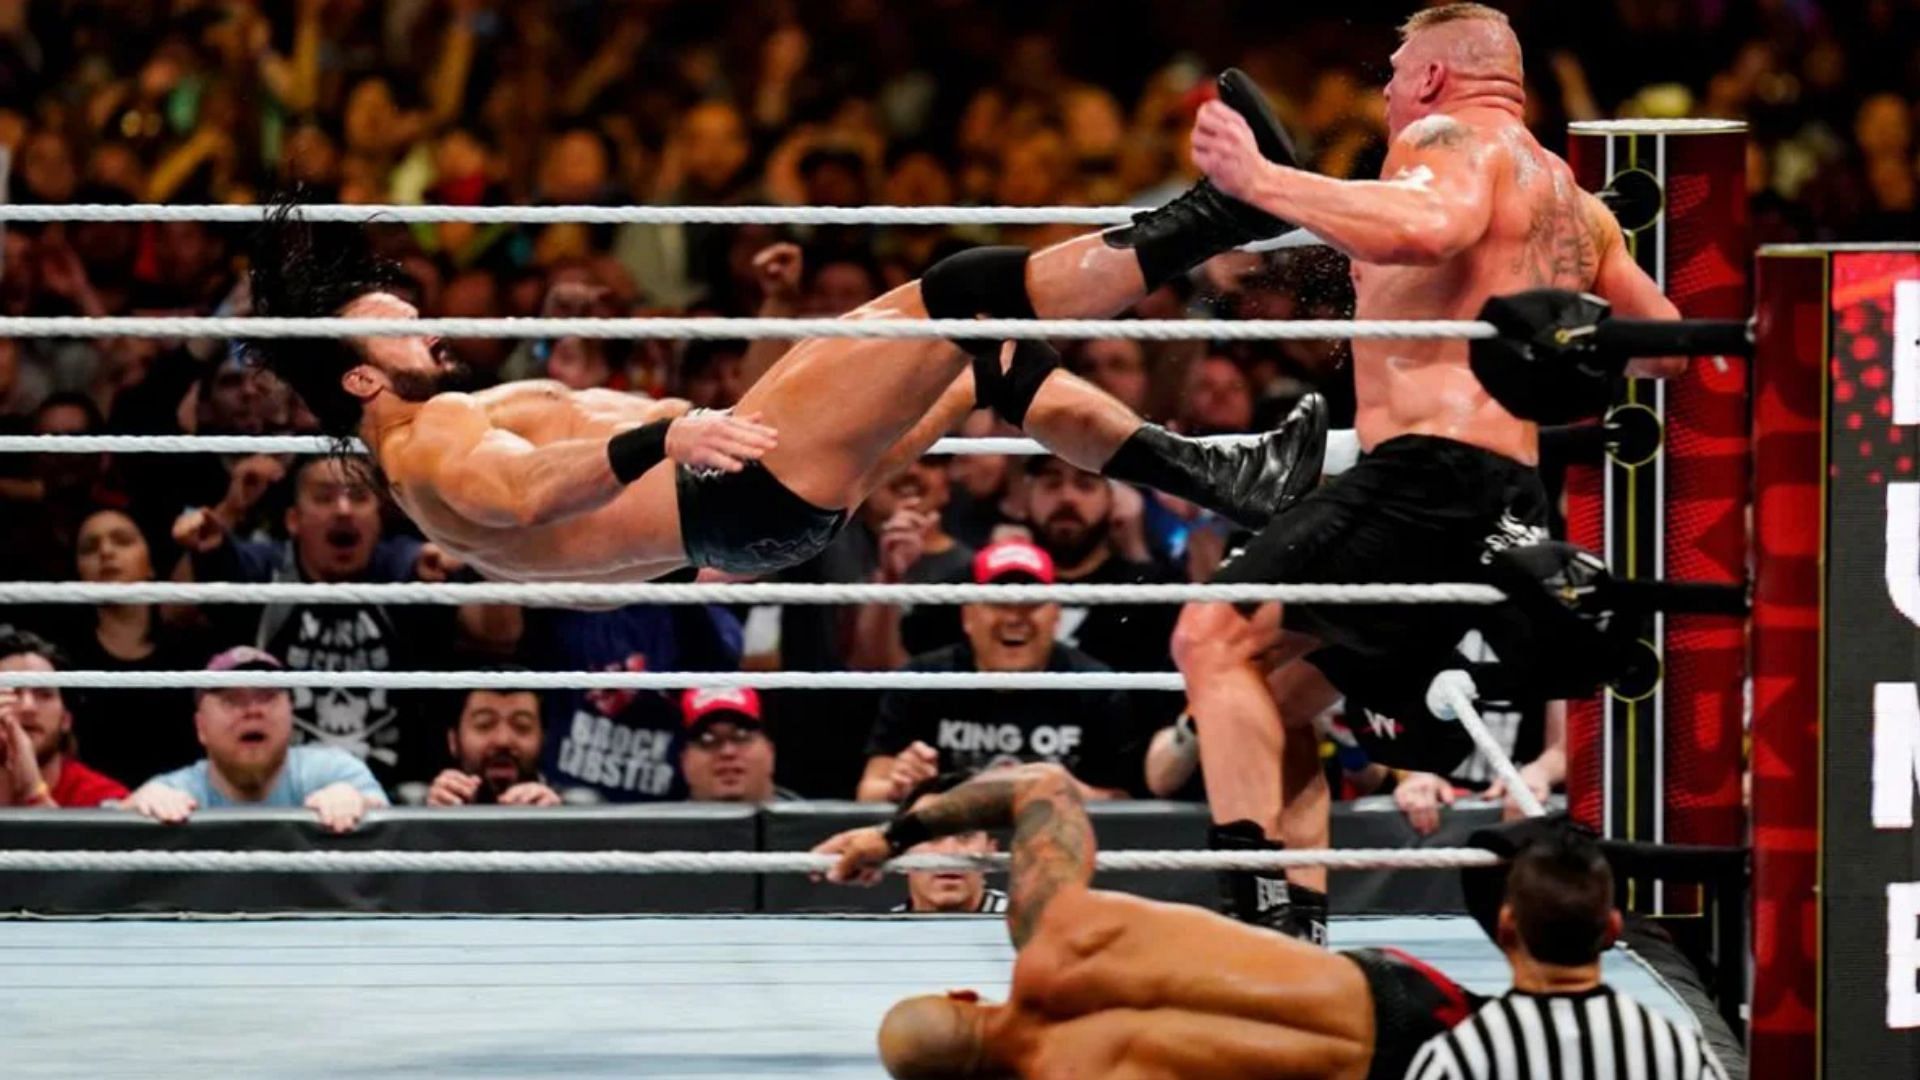 In 2020, Drew McIntyre eliminated then-WWE Champion Brock Lesnar from the Royal Rumble match